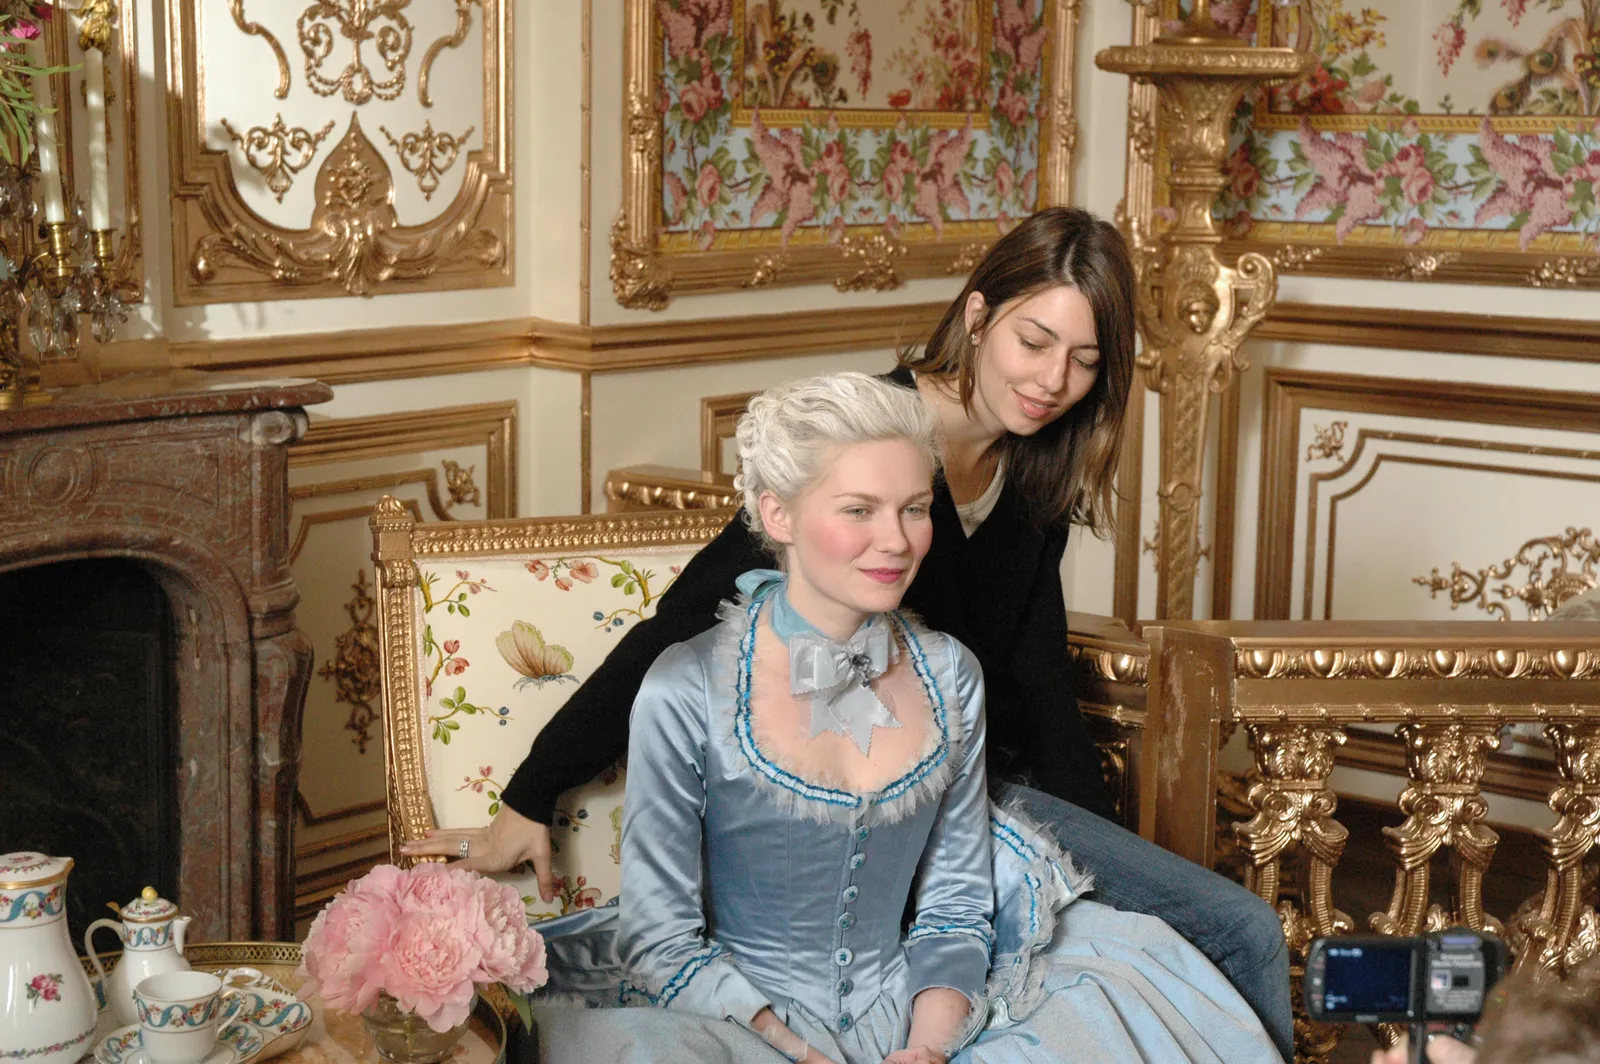 Sofia Coppola and Kirsten Dunst on the sets of Marie Antoinette